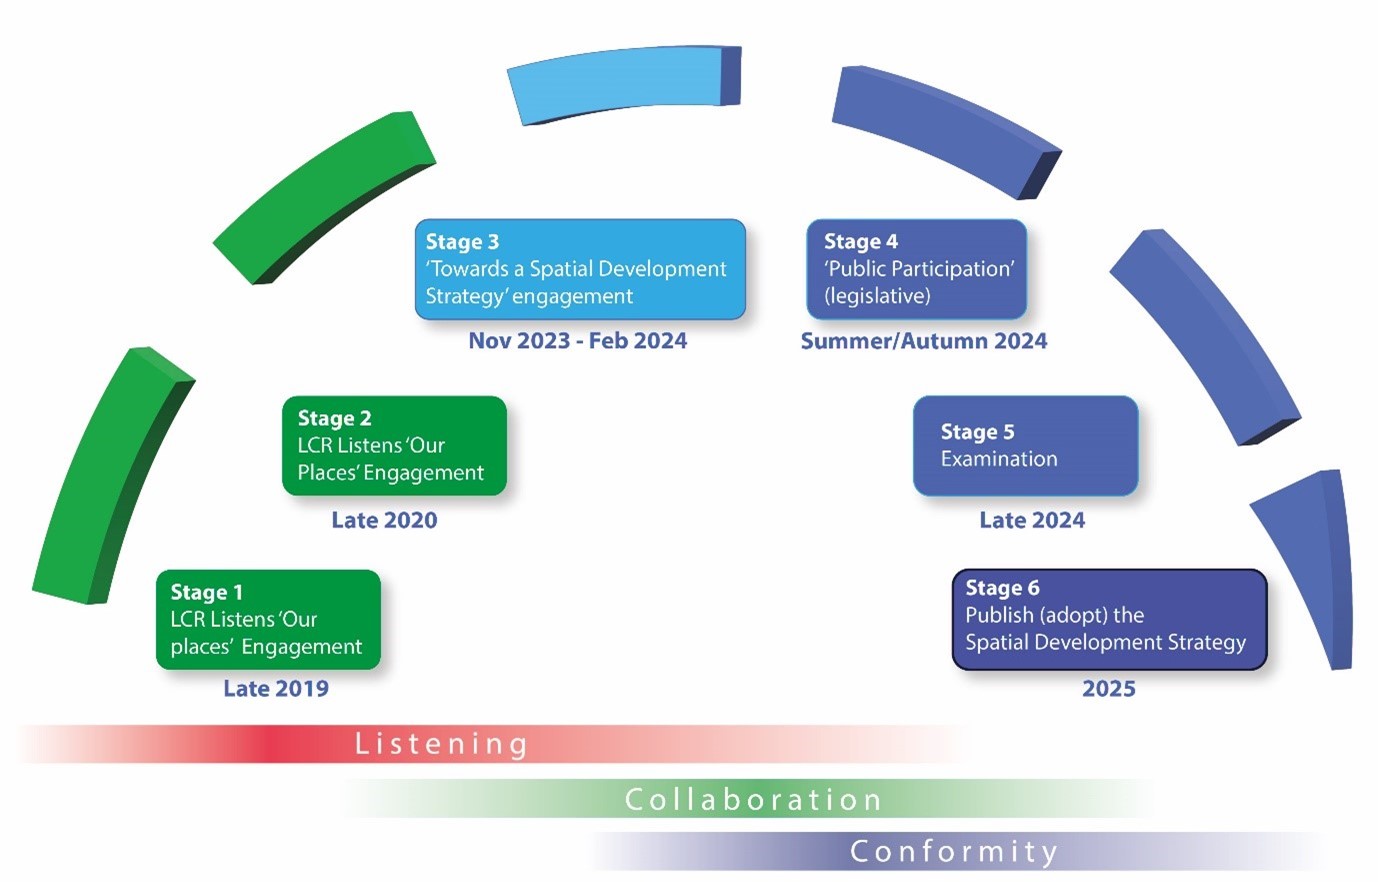 Infographic depicting the 6 stages of the Spatial Development Strategy: Stage 1 (late 2019) - LCR Listens: 'Our Places' Engagement, Stage 2 (late 2022) - LCR Listens 'Our Places' Engagement, Stage 3 (Nov 2023 to Feb 2024) - 'Towards a Spatial Development Strategy' engagement, Stage 4 (Summer/Autumn 2024) - 'Public Participation' (legislative), Stage 5 (Late 2024) - Examination, and Stage 6 (2025) - Publish (adopt) the Spatial Development Strategy.